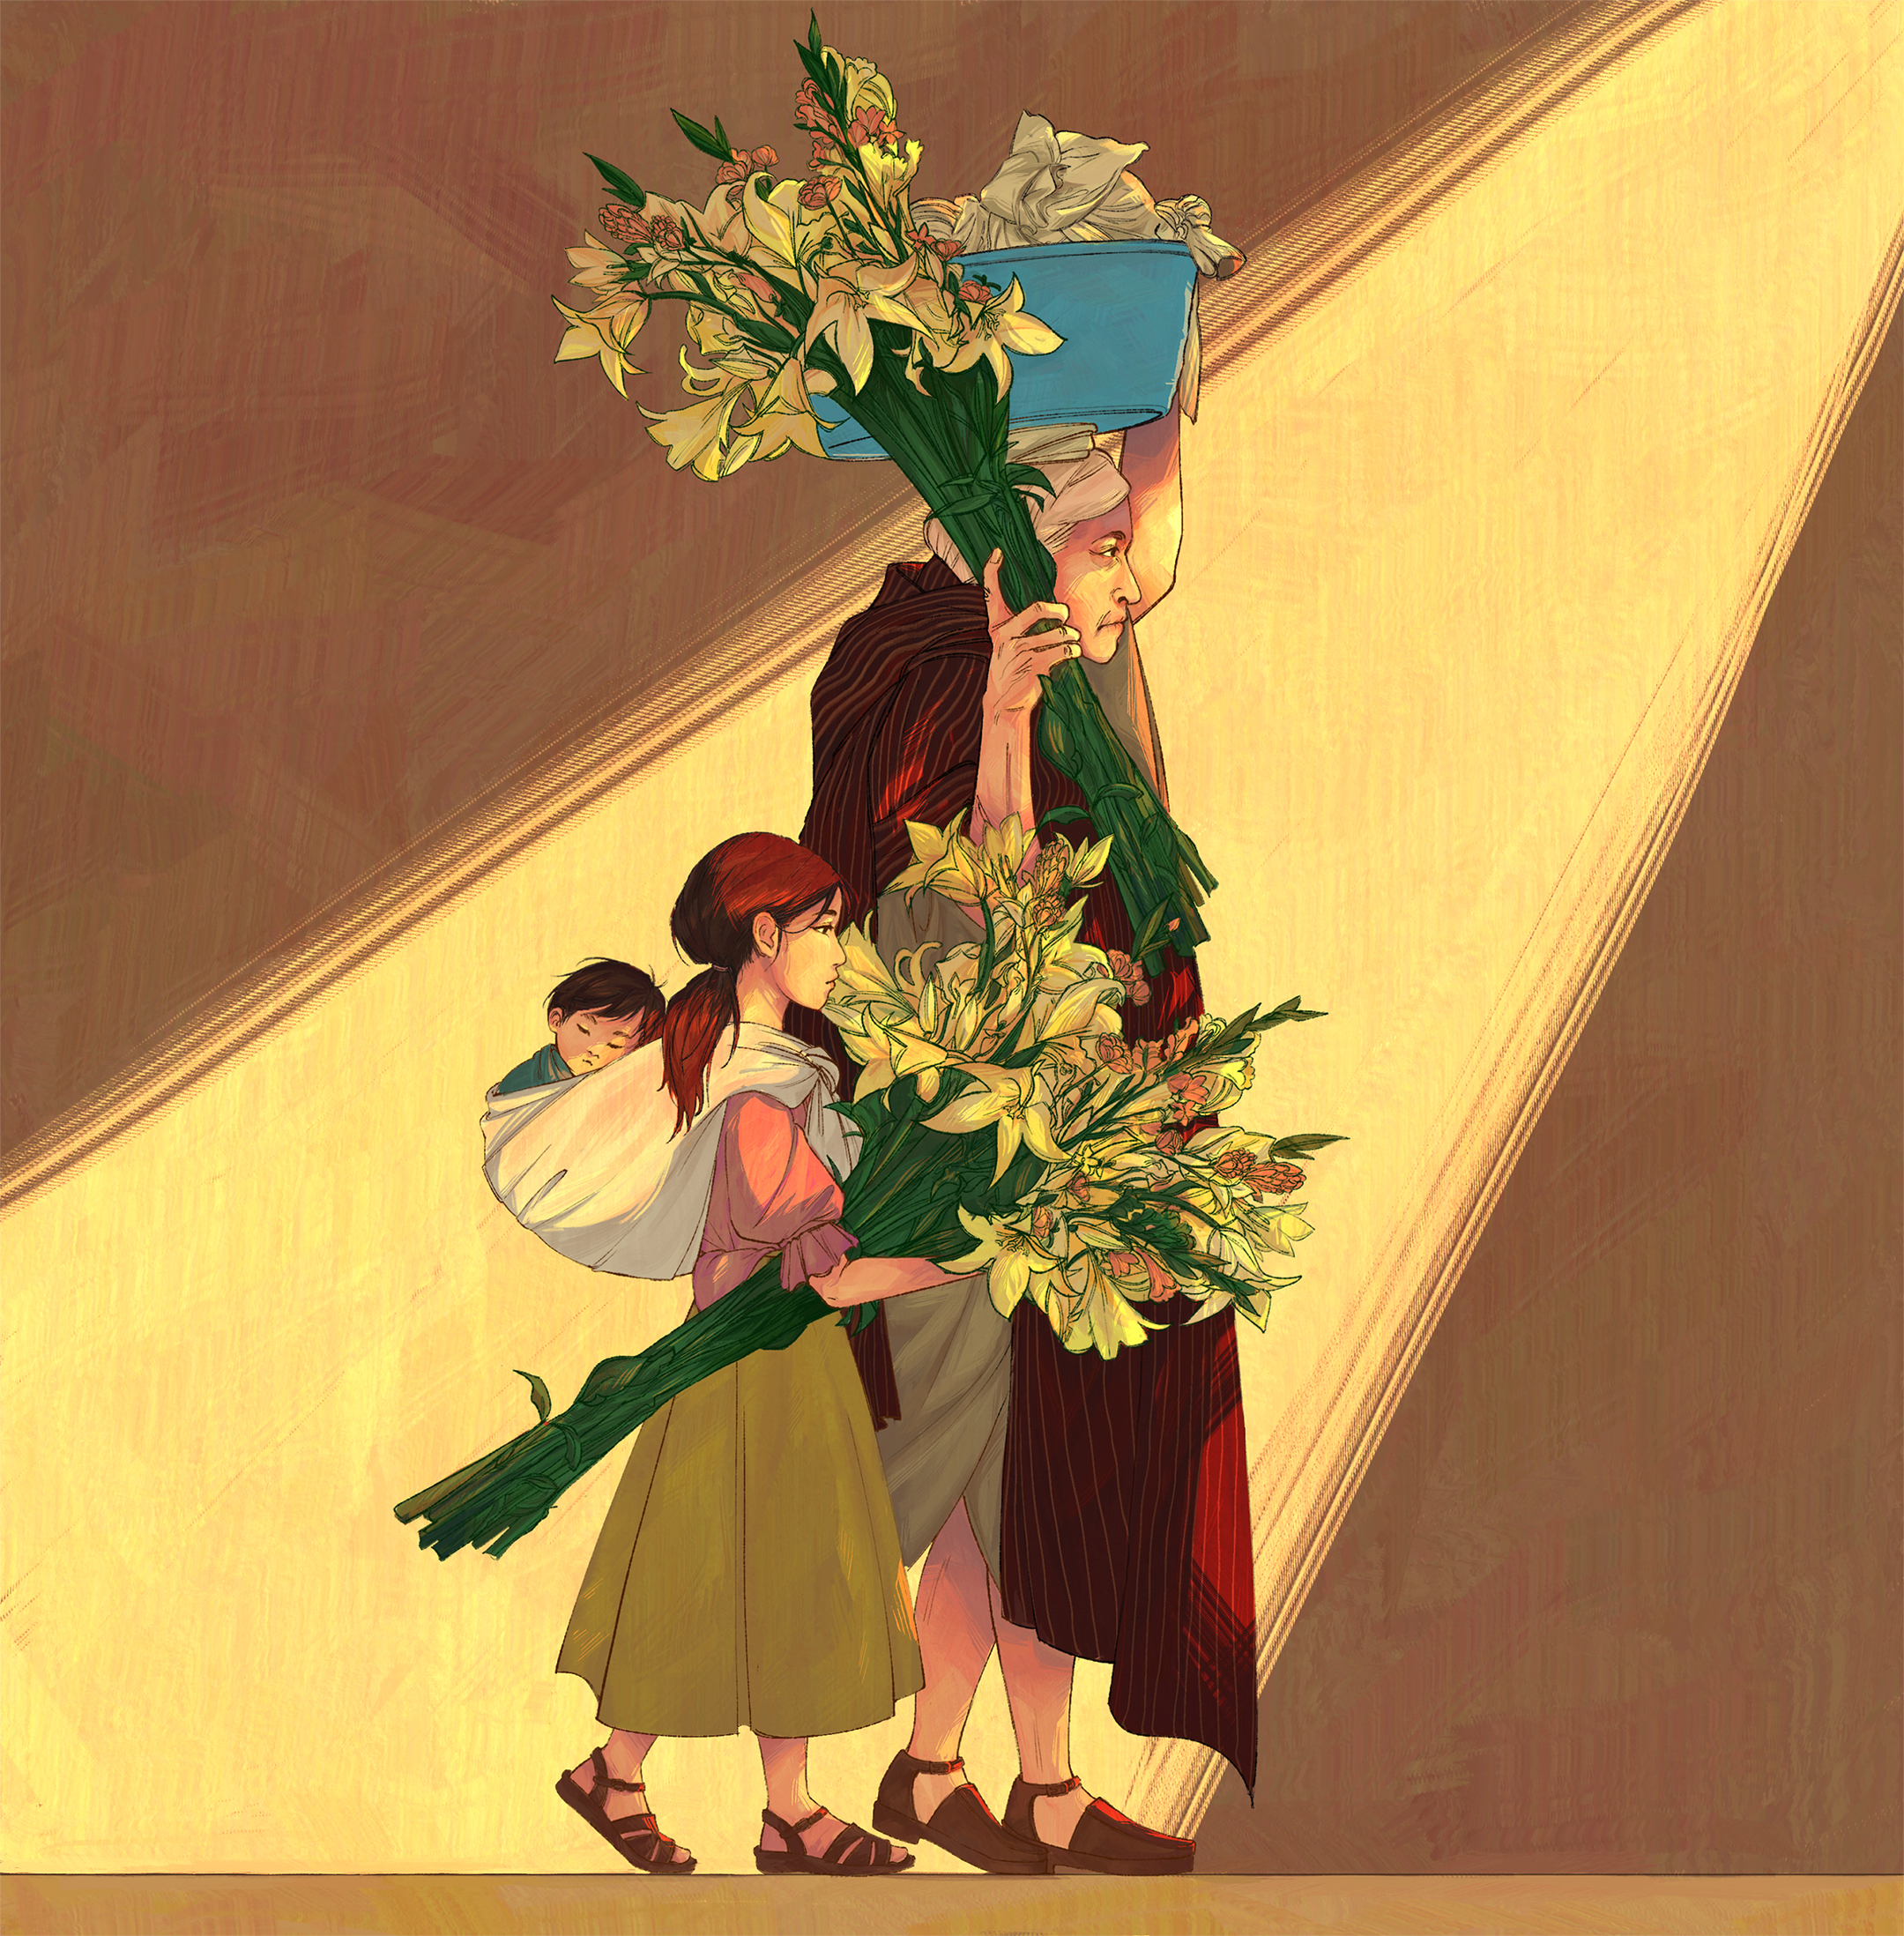 Illustration of an old woman carrying flowers in her hand and a basin of wash on her had, accompanied by a young woman carrying flowers and, on her back, a baby